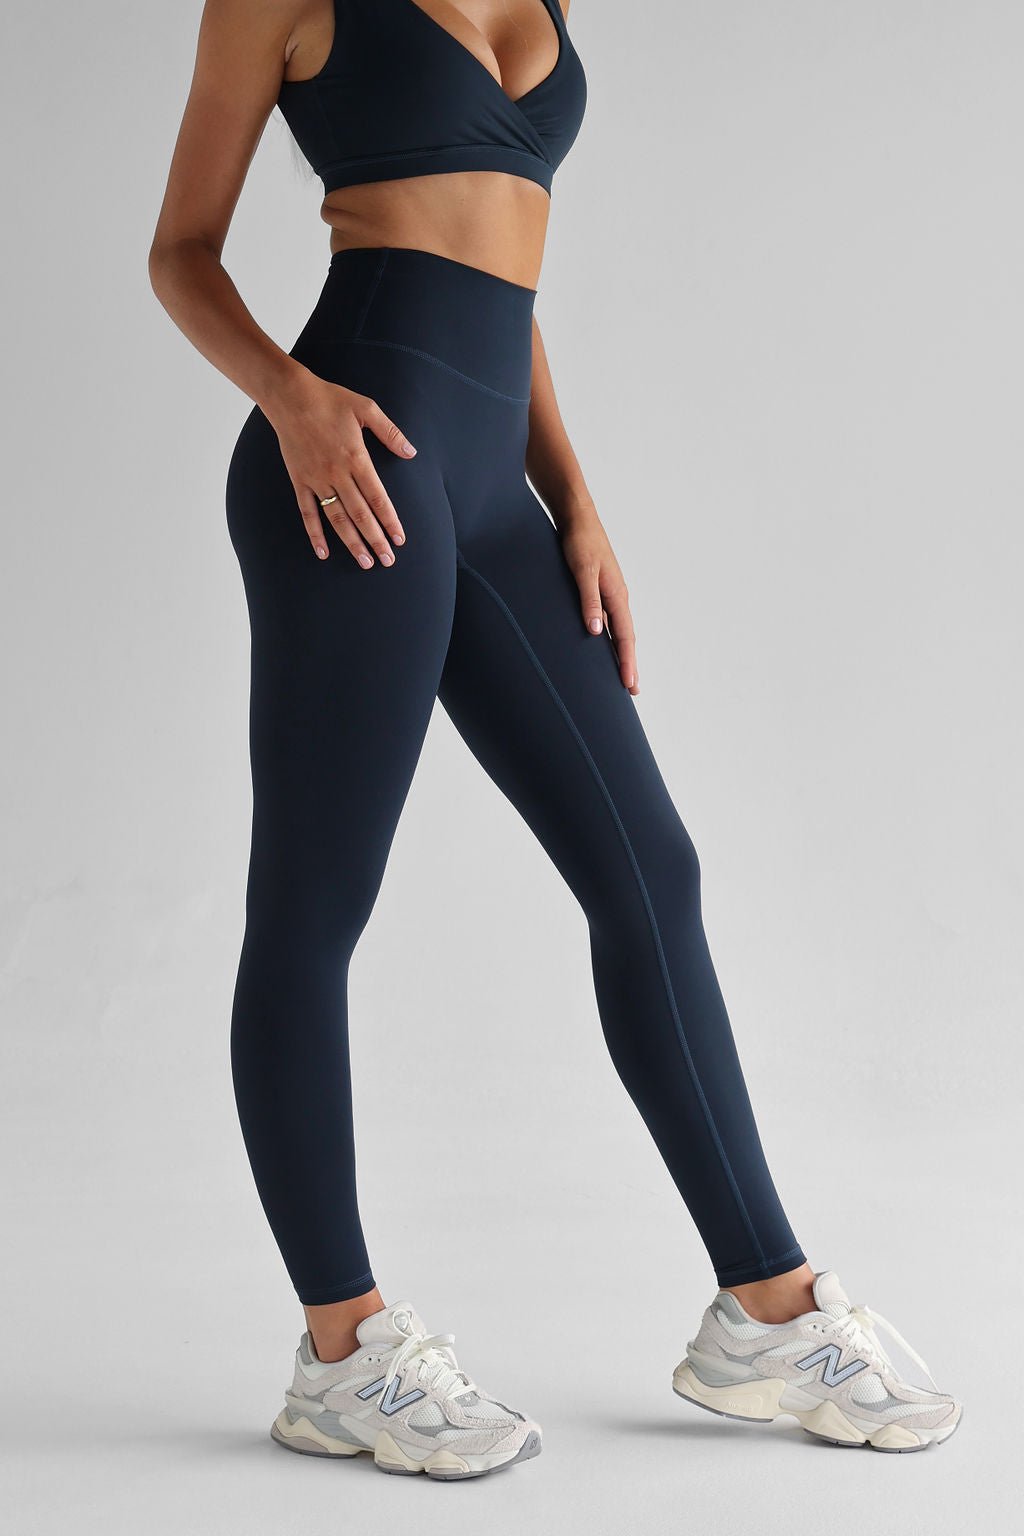 Evolve Sculpt Legging (Navy) - New Dimensions Active - Sustainable Wear